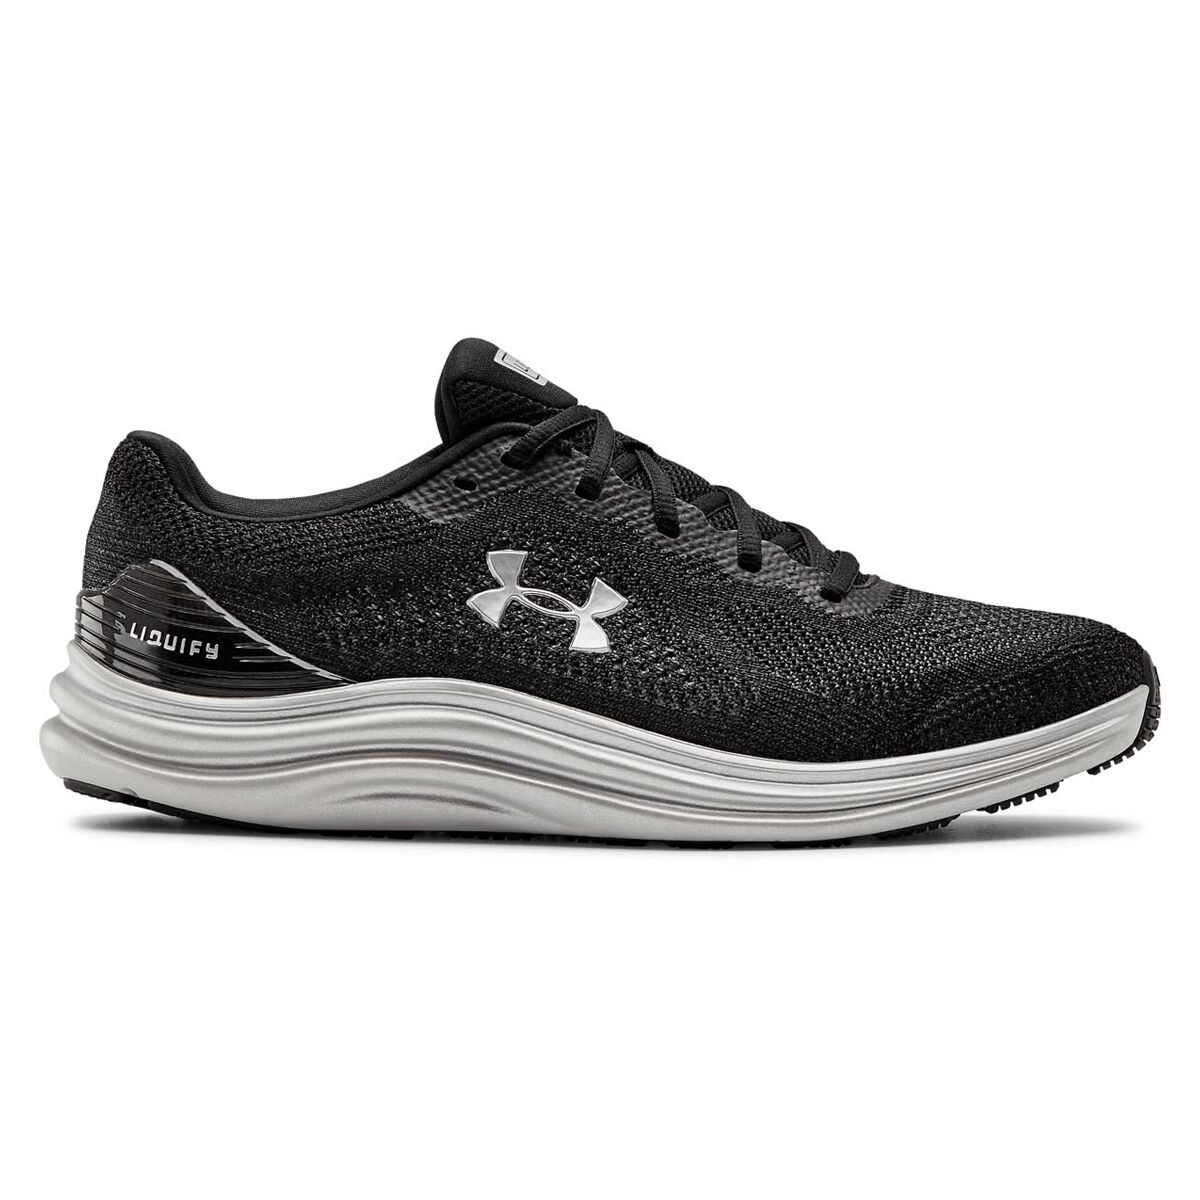 rebel sport under armour shoes